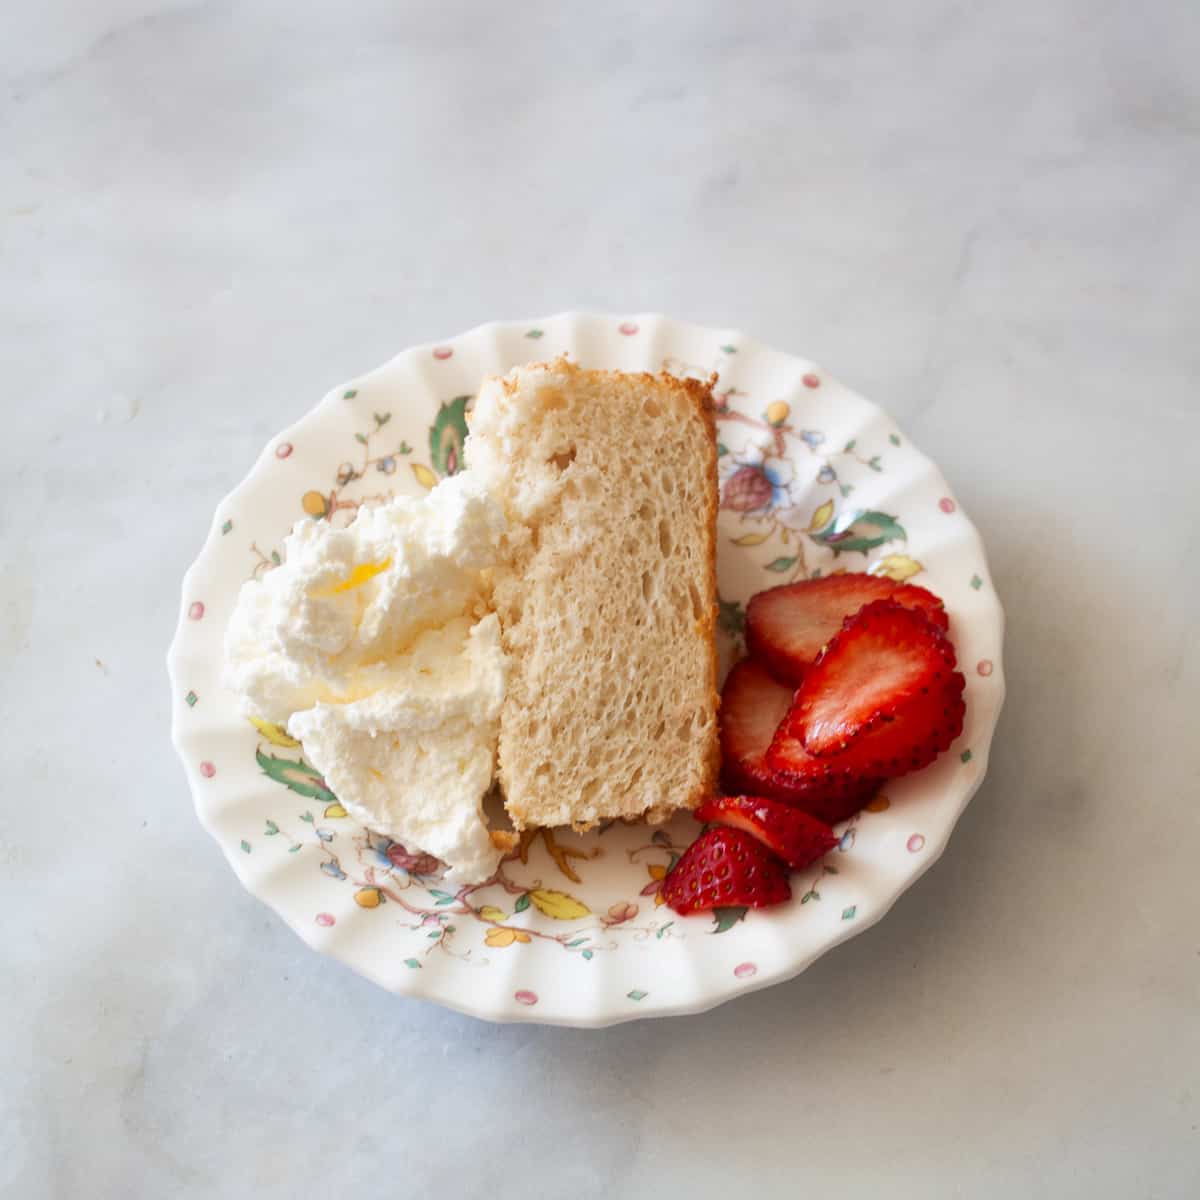 A slice of gluten free angel food cake with sliced strawberries and whipped cream.